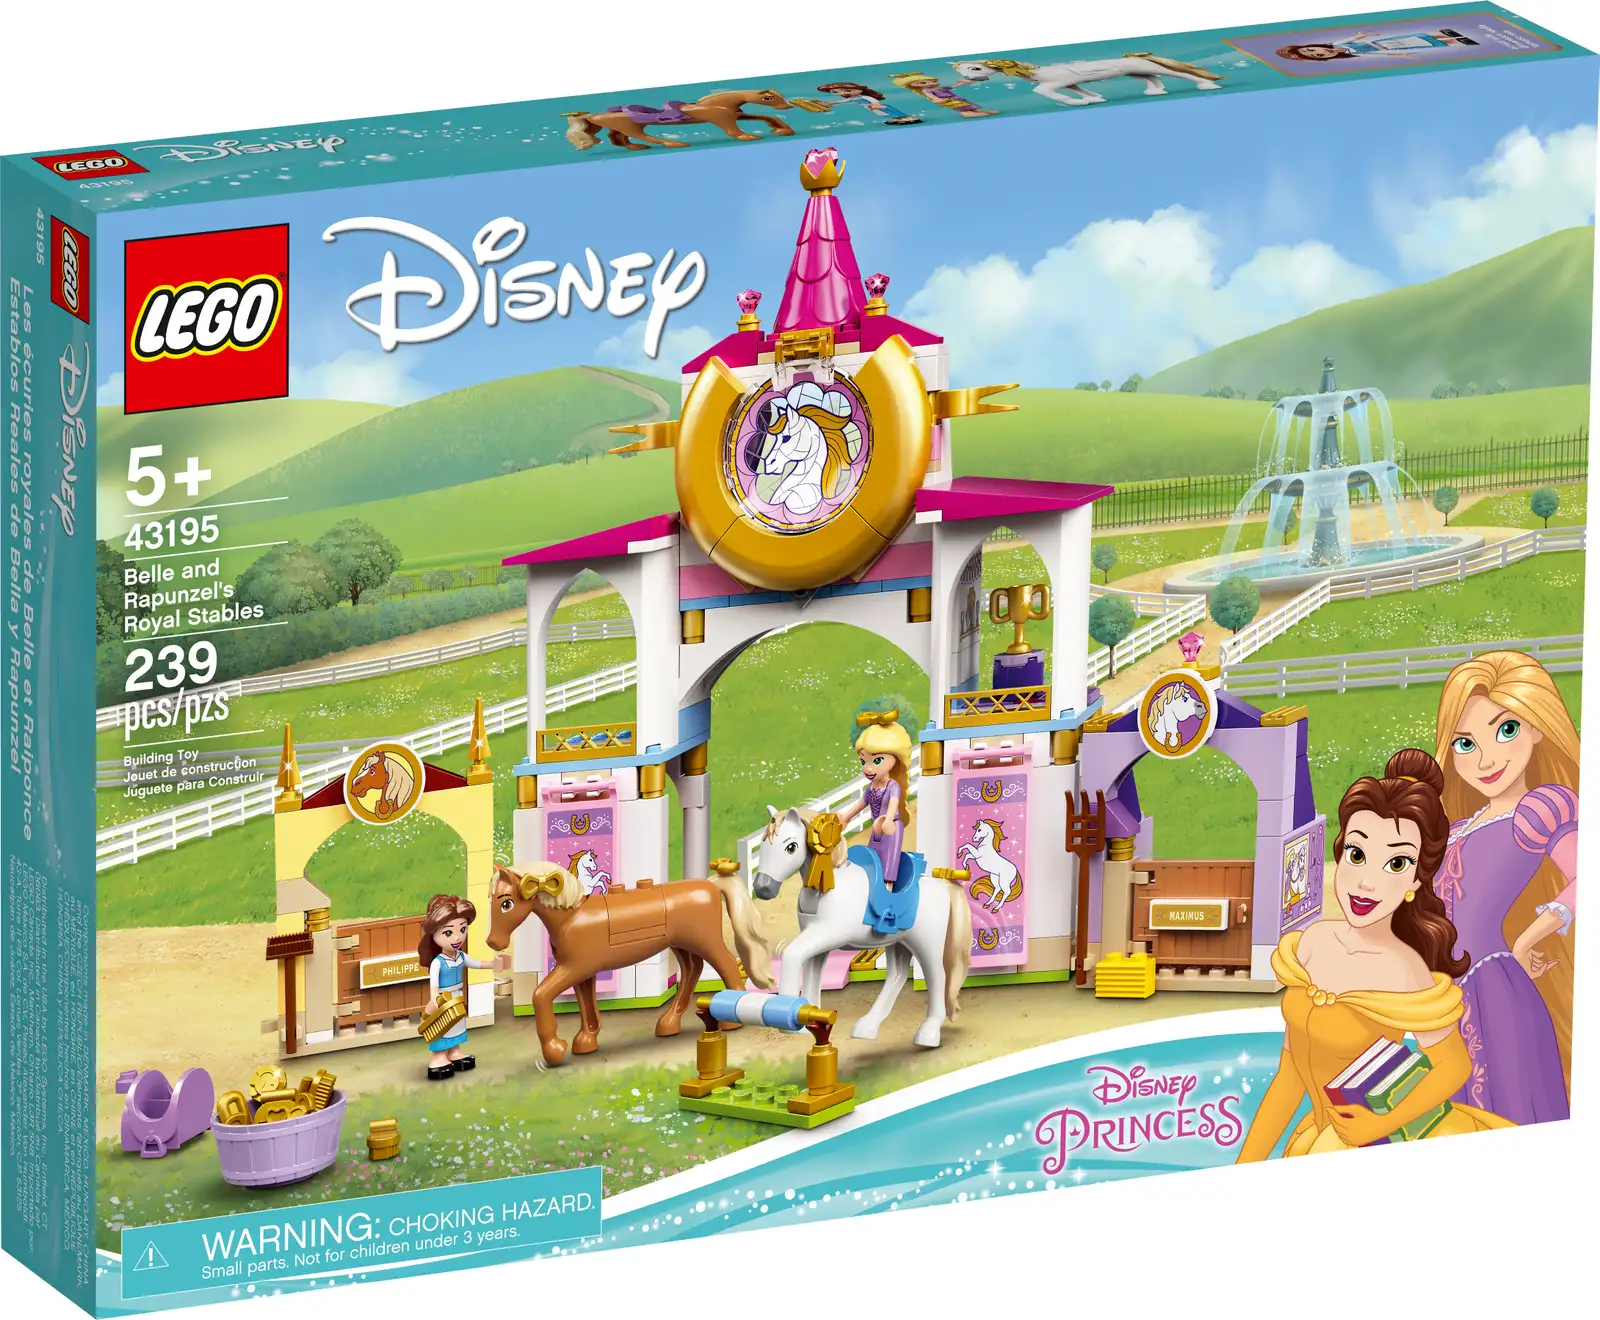 Thrill any Disney Princess fan who also loves horses with this detailed LEGO® ǀ Disney Belle and Rapunzel’s Royal Stables (43195) buildable toy set, featuring a large main stable with trophy and accessory rooms, a cozy attic space and 2 smaller, detachable horse stalls. This imaginative set includes printed building instructions and digital Instructions PLUS via the LEGO Building Instructions app. The guided building process lets even younger builders feel like master builders… awesome! Open-ended creative play Kids will love playing with this set and its accessories, including hay, horse food, saddles, stable tools and a trophy, to help kick-start a child’s imagination as they care for the animals and role-play exciting stories. Beloved characters, ready for fun This creative set gets kids playing with 2 mini-doll figures – Disney’s Belle and Rapunzel – plus rideable Maximus and Philippe LEGO horse figures. This premium Disney Princess gift will be tops, one that all the kidstalk about. Kick-start fun role-play with this LEGO® ǀ Disney Belle and Rapunzel’s Royal Stables (43195) set, a different and unique Disney Princess construction gift. Play starts with building and doesn’t end! Inventive adventures await. This creative set features a 3-level stable with 5 rooms, 2 small, detachable stalls, a sticker sheet and plenty of play starters for imaginative fun. 2 beloved characters, Disney’s Belle and Rapunzel, are ready for work and play in this top buildable toy. The awesome kit also includes 2 LEGO® horse figures, Maximus and Philippe. Any Disney Princess fan aged 5 and up will love this set. Kids can create endless stories with this premium gift set that will wow friends and is perfect for hours of imaginative play. Made for play or display. With the stable and connected stalls measuring over 9.5 in. (24 cm) high, 13 in. (33 cm) wide and 2.5 in. (7 cm) deep, this set is made for play and looks cool on a shelf. Want to give kids an even more awesome building experience? Now you can with digital Instructions PLUS! With intuitive modes like zoom, rotate and ghost mode, it’s LEGO® building for the digital age! With detailed mini-doll figures and ridable horse figures, this Disney Princess buildable toy set encourages open creative play, helping to build important skills with lots of fun story starters. LEGO® components meet rigorous industry standards to ensure they are consistent, compatible and connect and pull apart reliably every time– it’s been that way since 1958. LEGO® components are dropped, heated, crushed, twisted and analyzed to make sure they meet strict global safety standards.